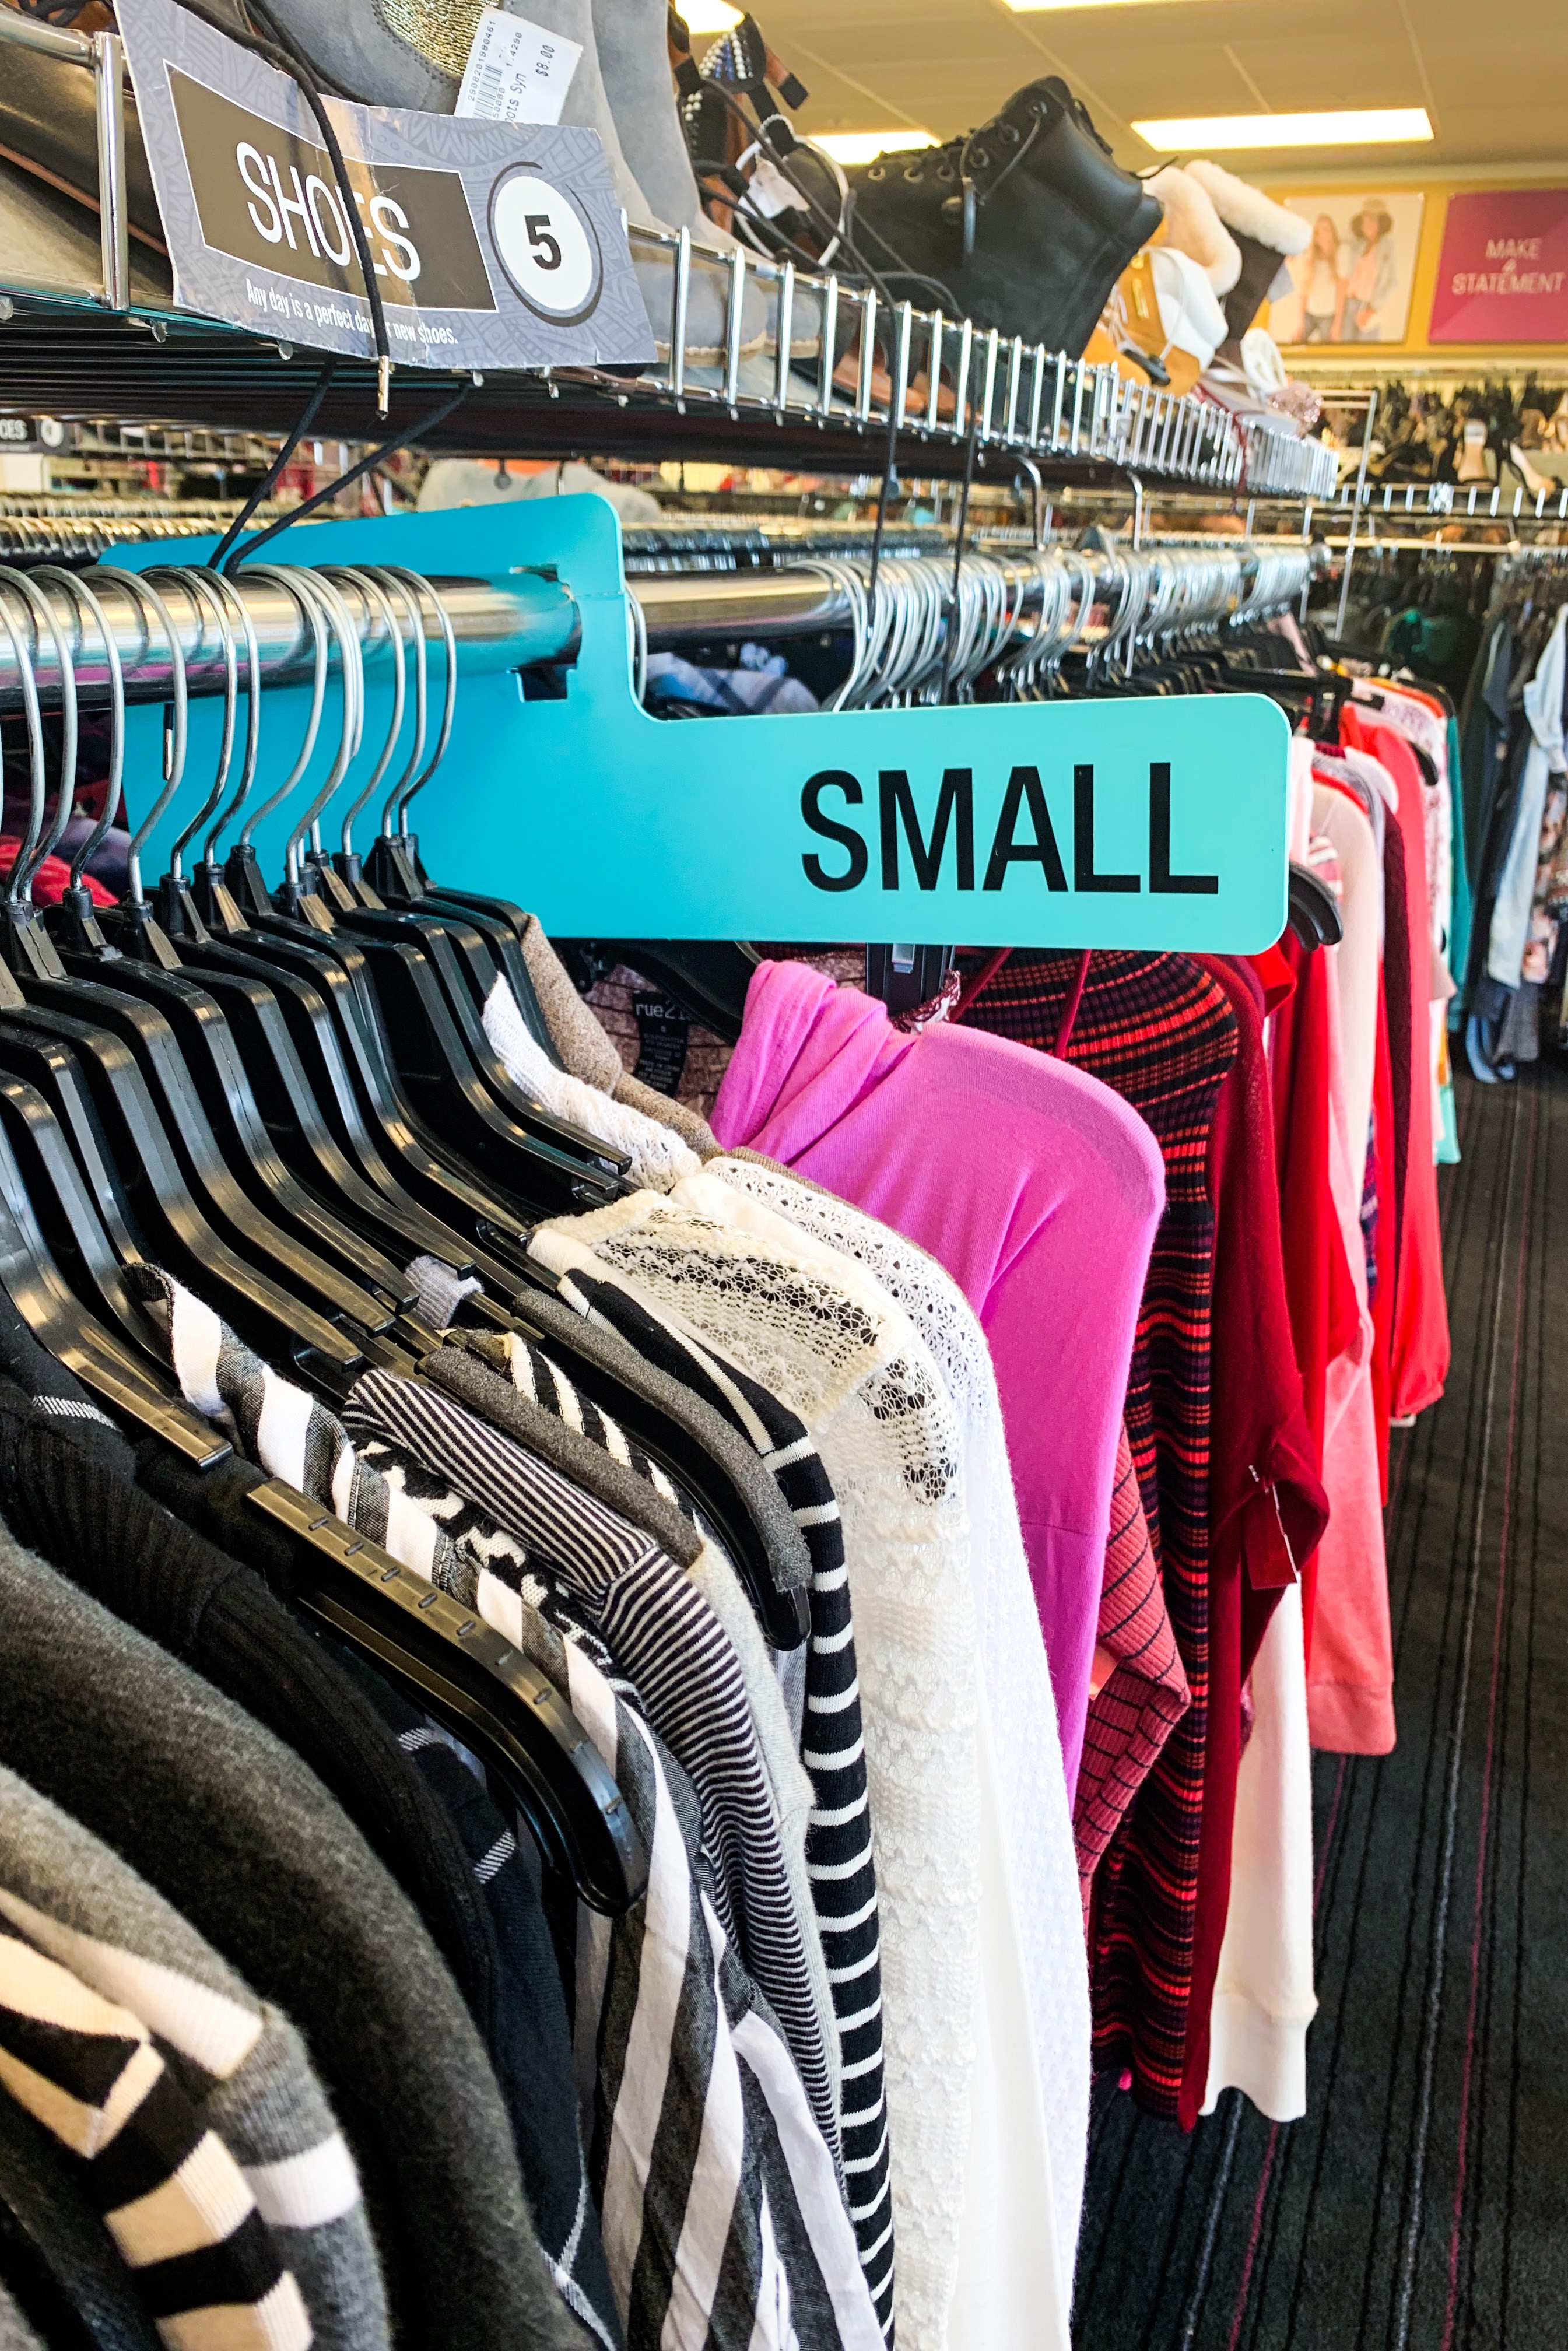 Plato's Closet now open for buying gently-used clothes; sales to